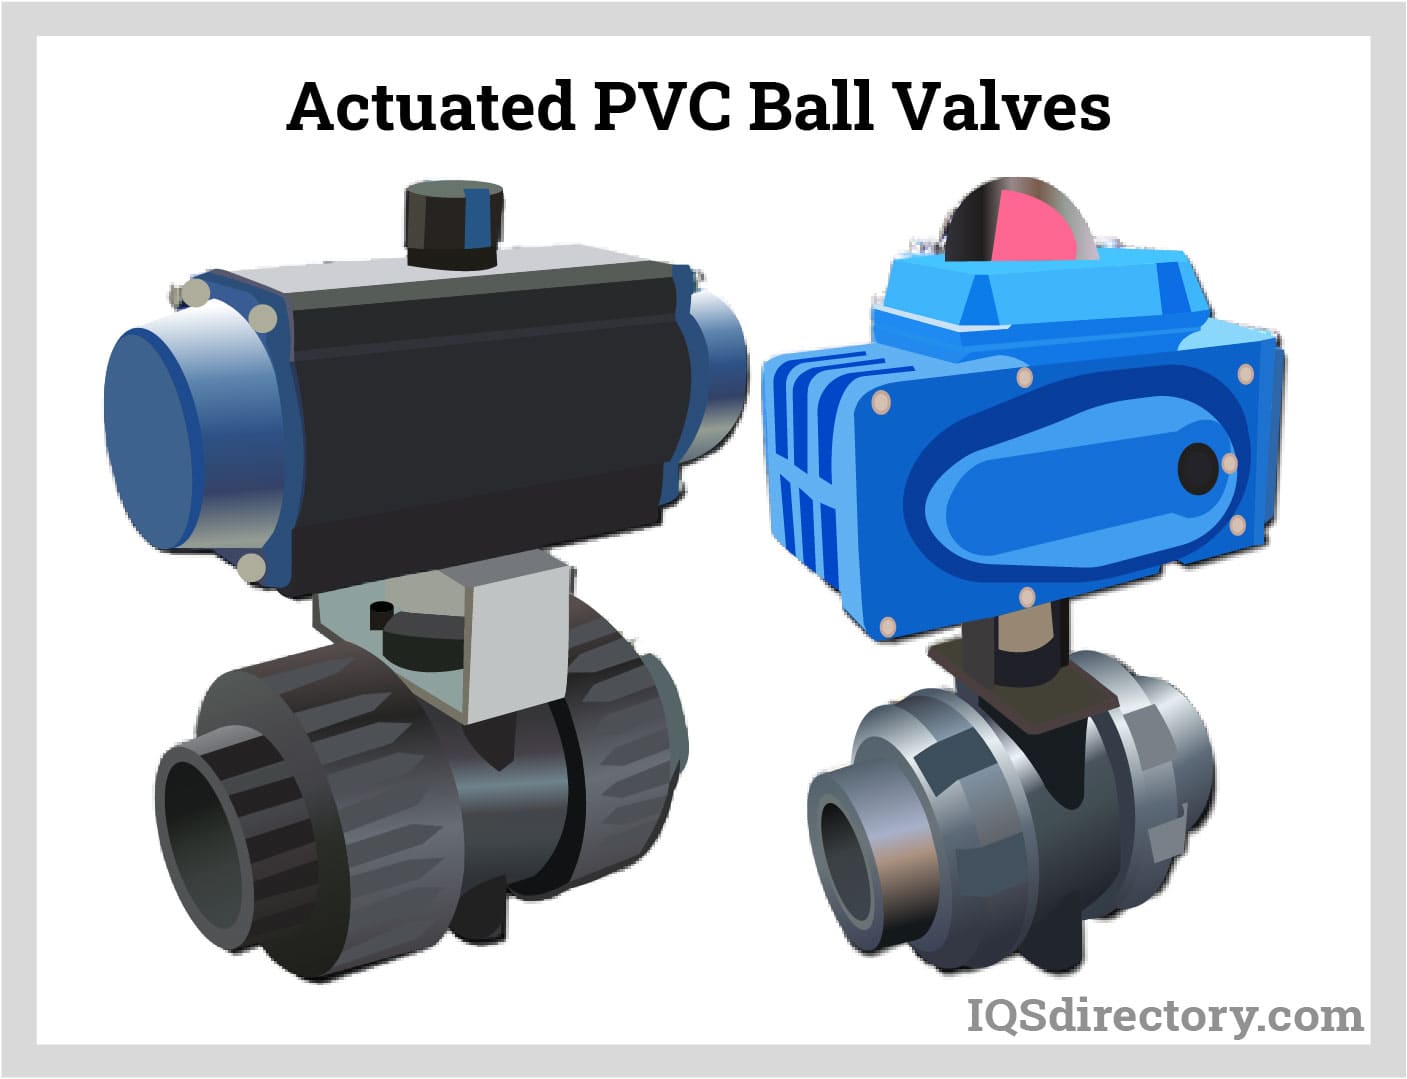 Actuated PVC Ball Valves